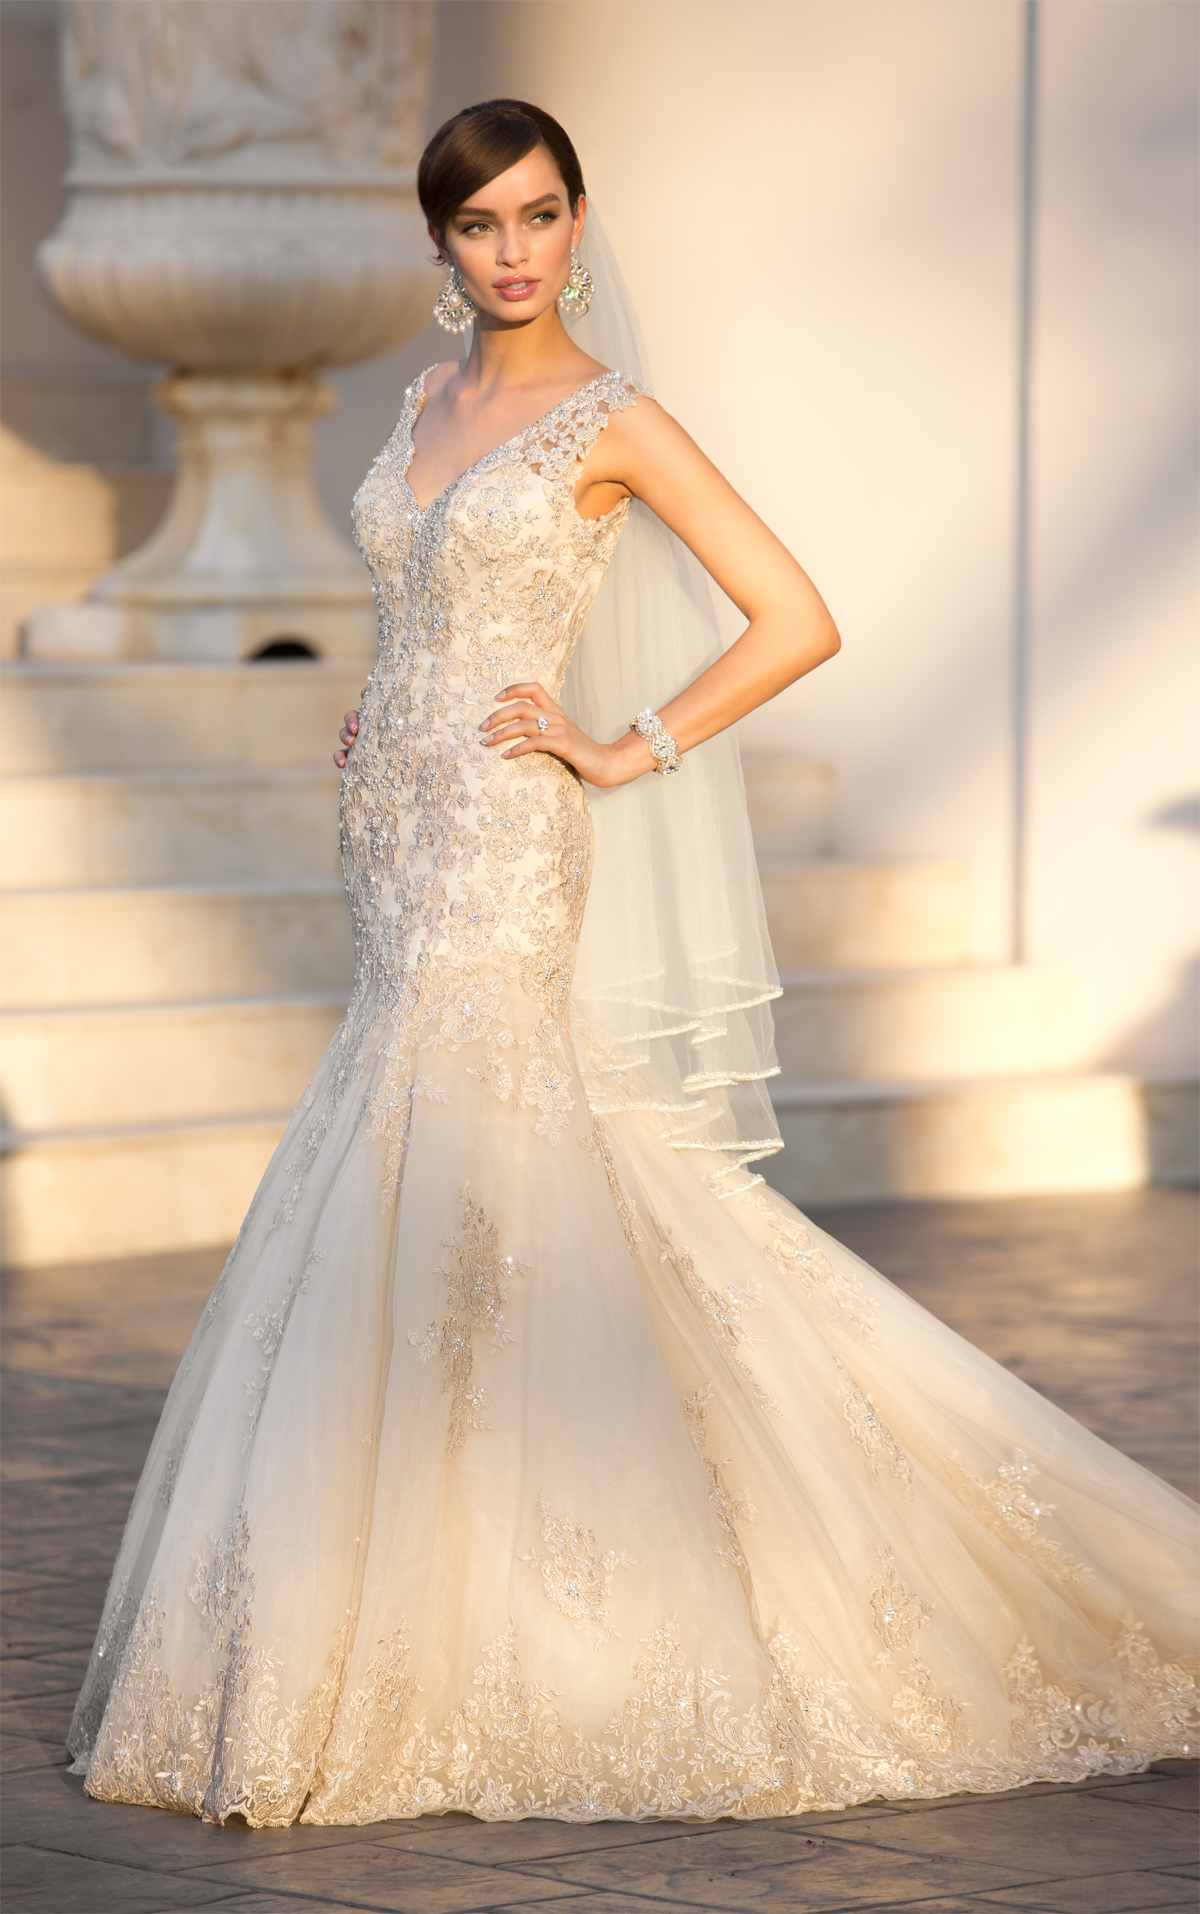 26 Wedding Gowns That Will Leave You Speechless